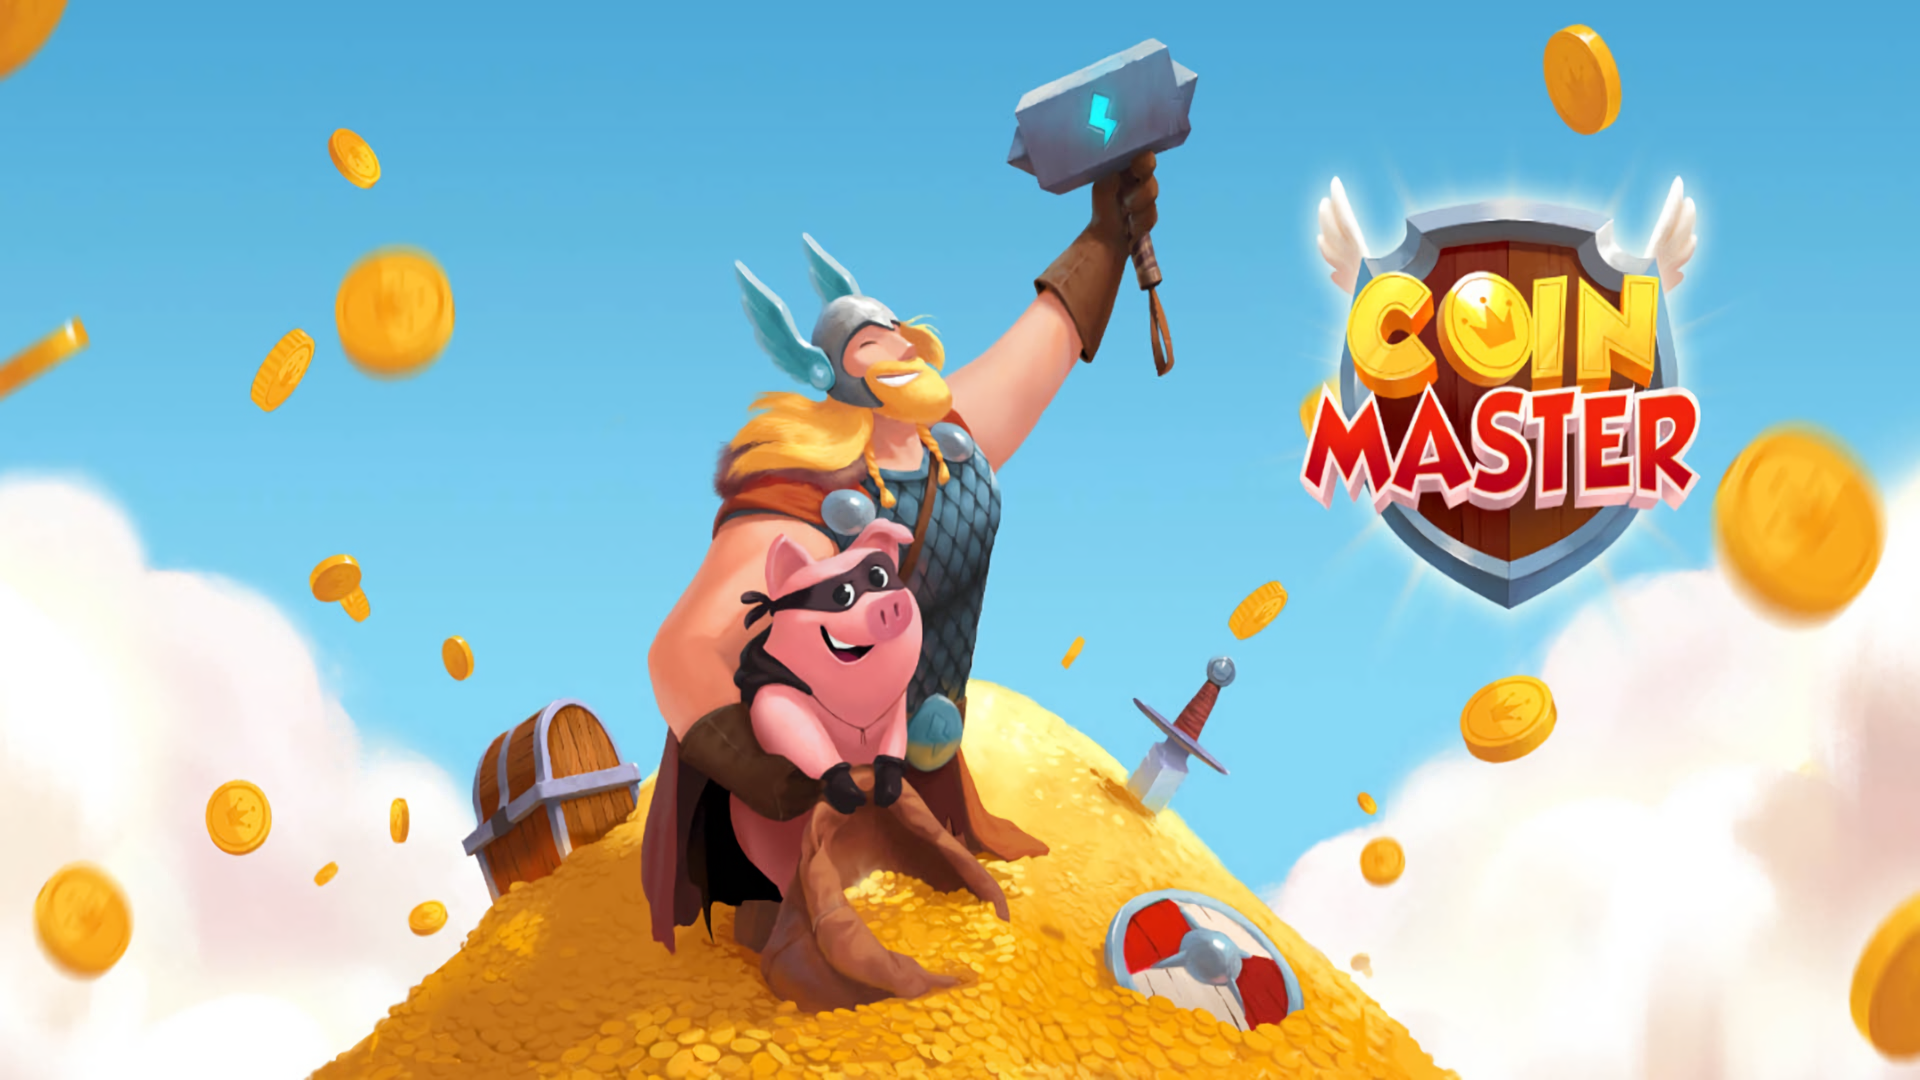 Top 10 Android Games on Play Store: Coin Master